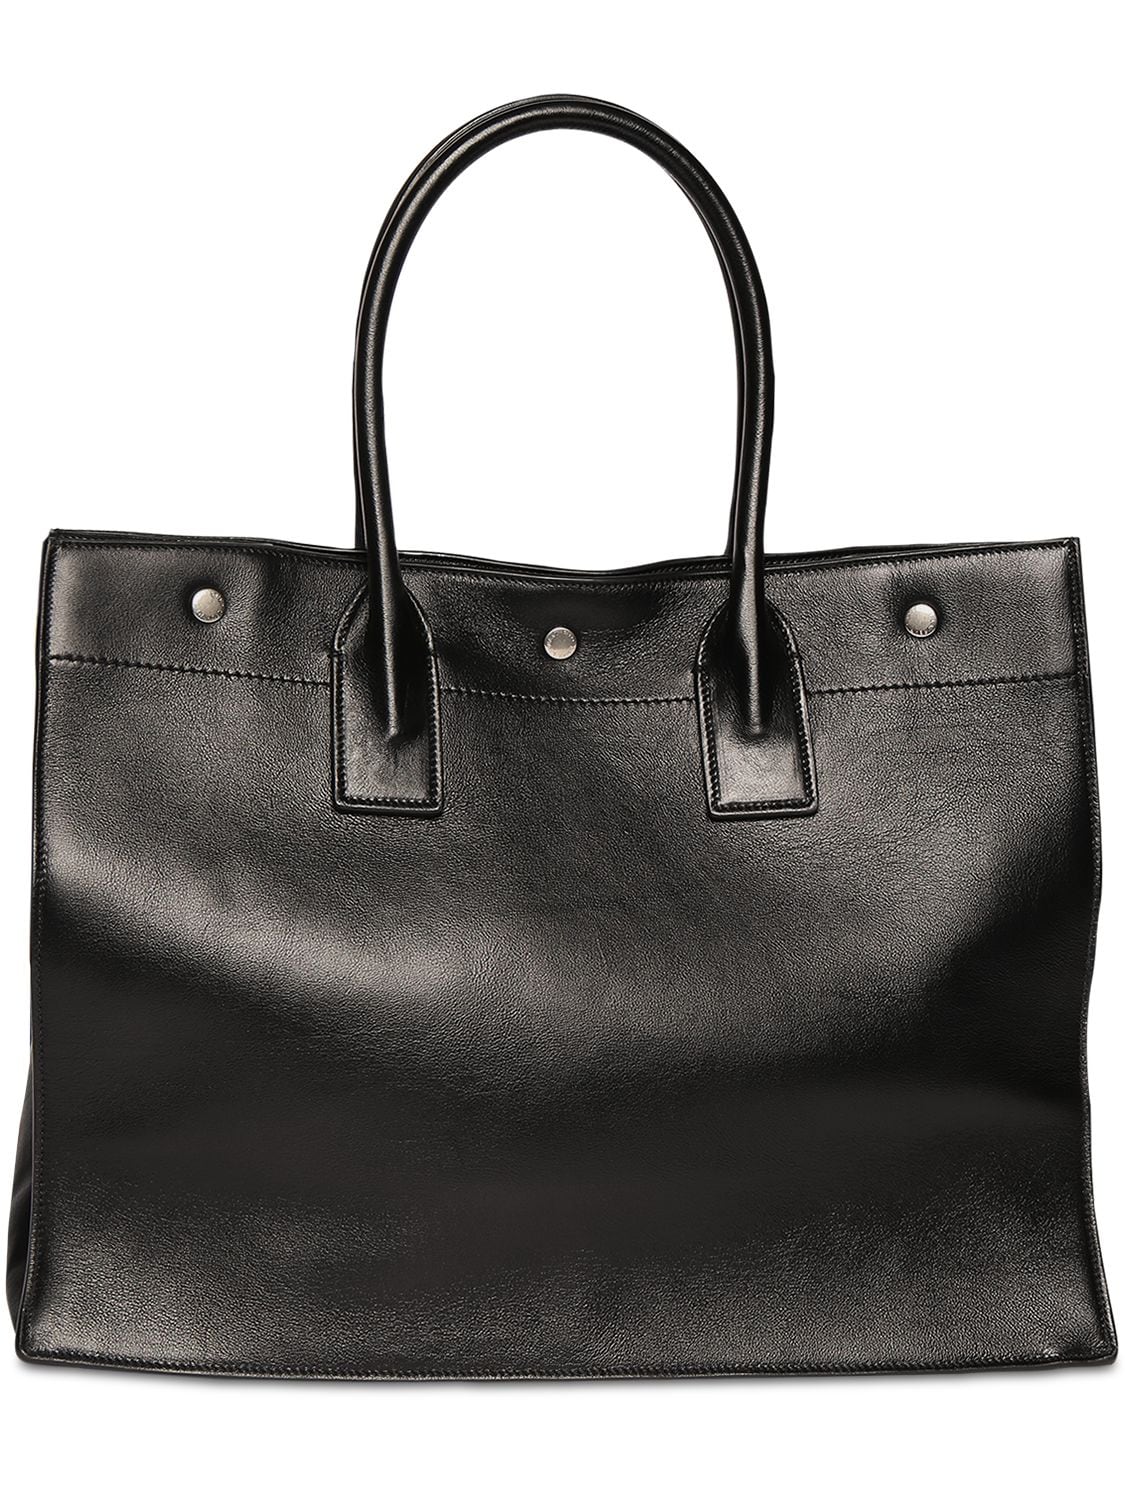 Image of Rive Gauche Small Leather Tote Bag